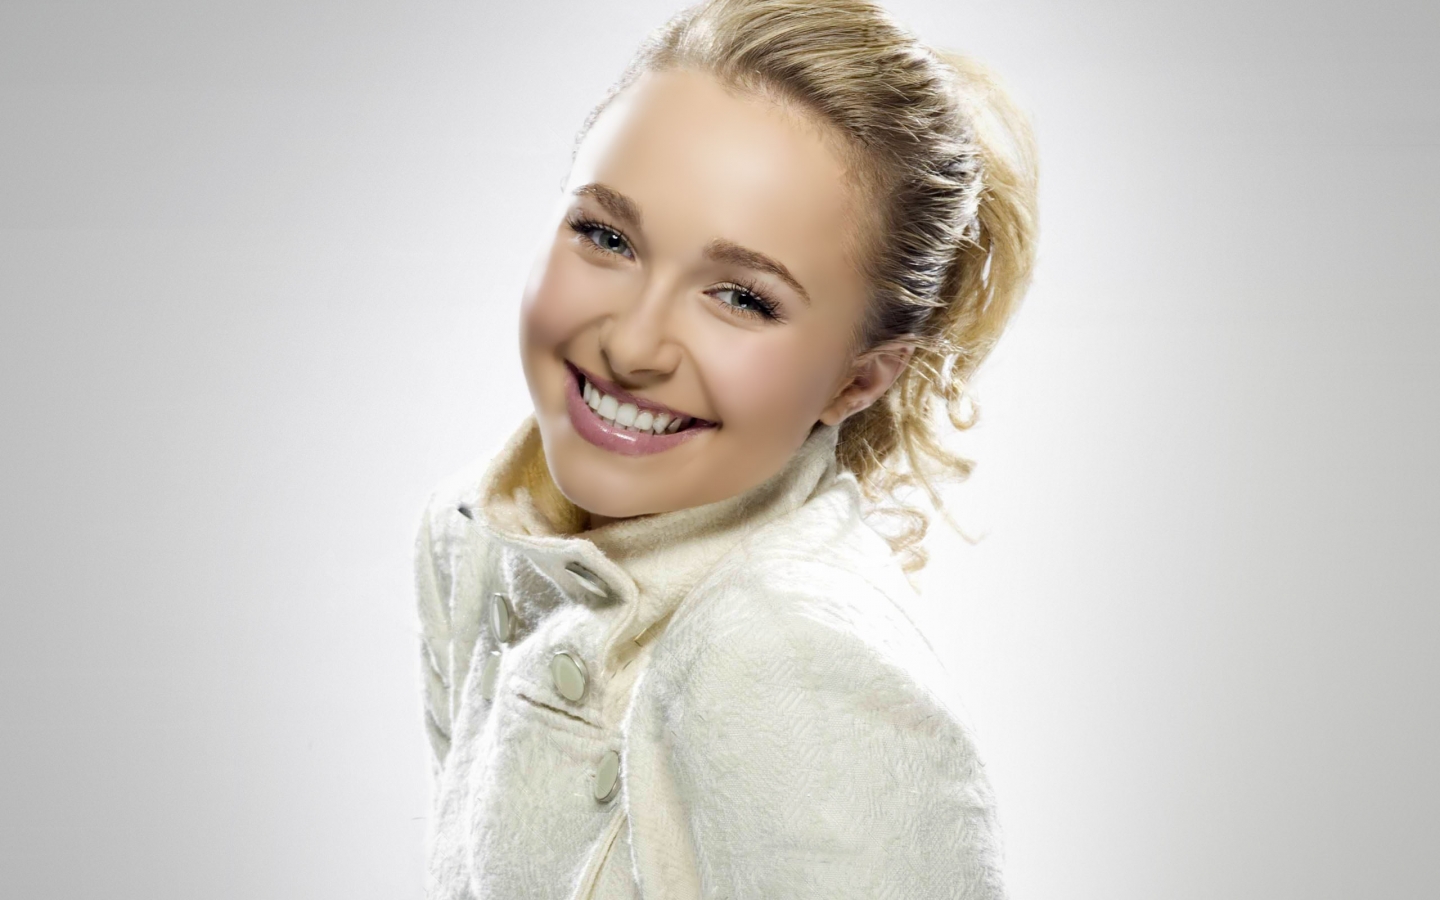 Hayden Panettiere Cute Smile for 1440 x 900 widescreen resolution